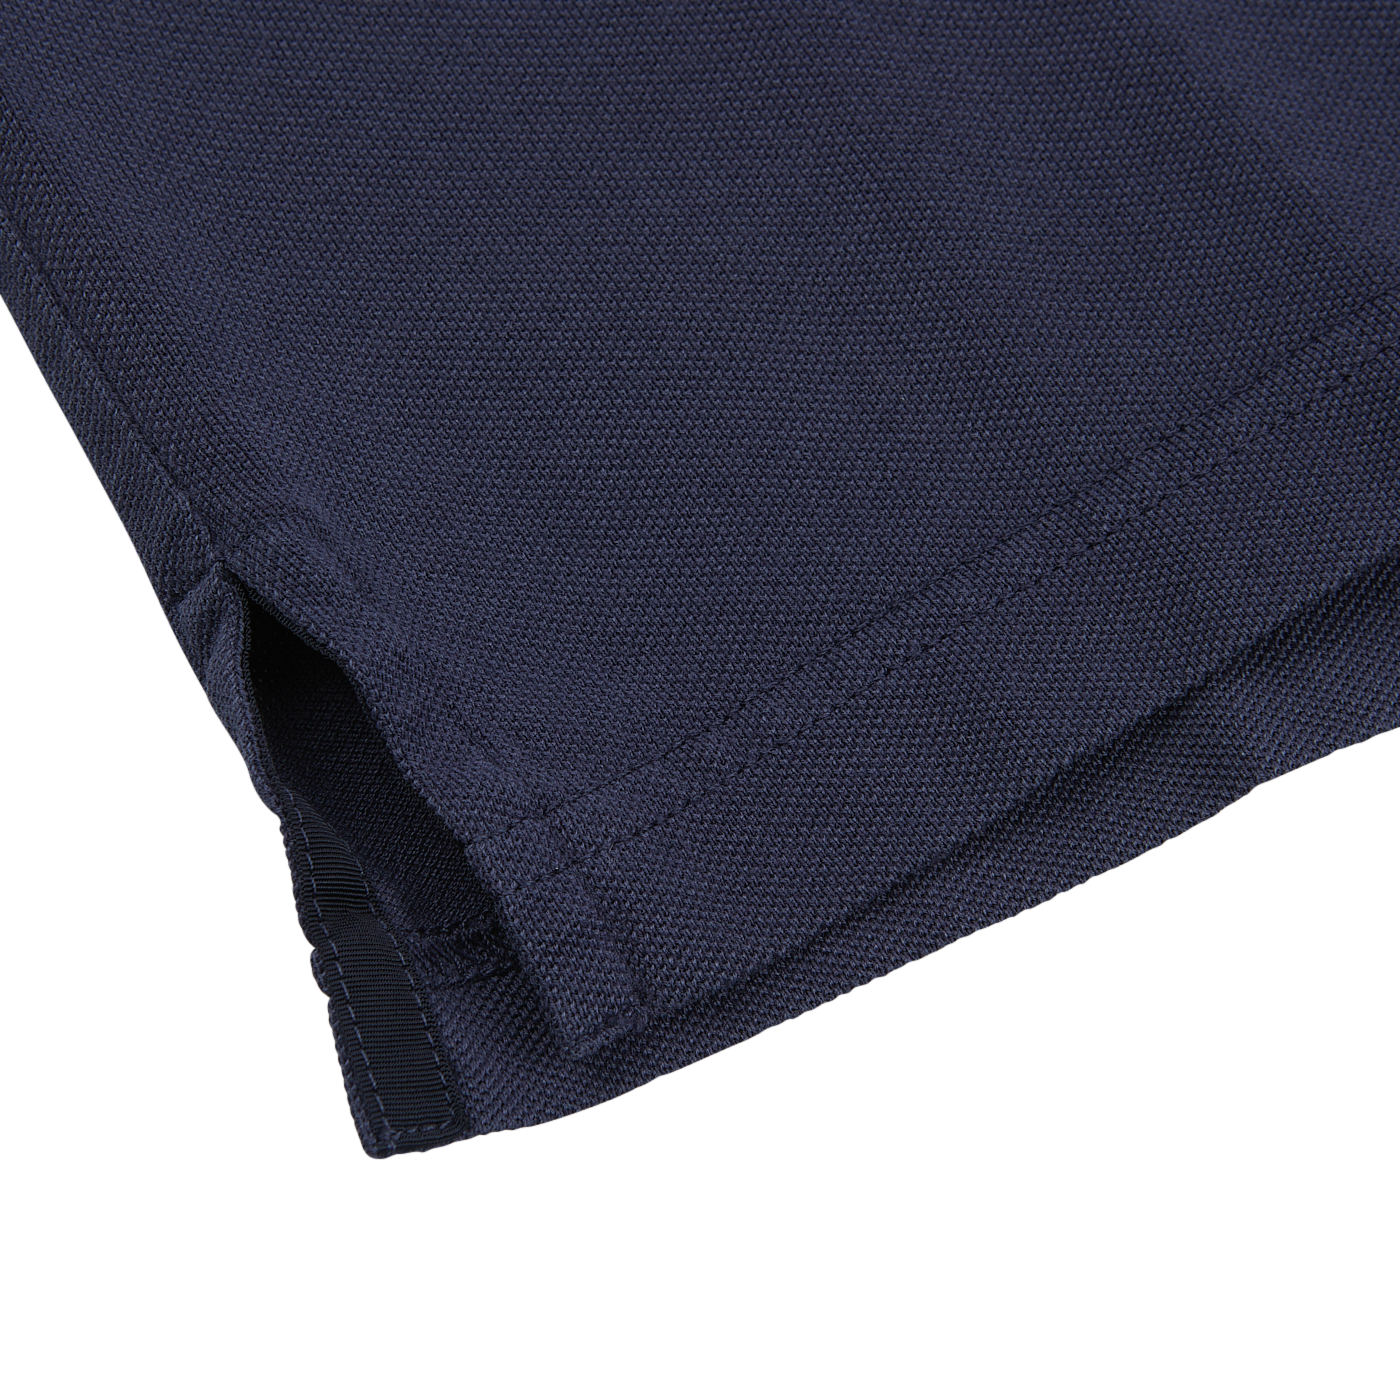 A close up of a Fedeli washed navy cotton pique polo shirt.